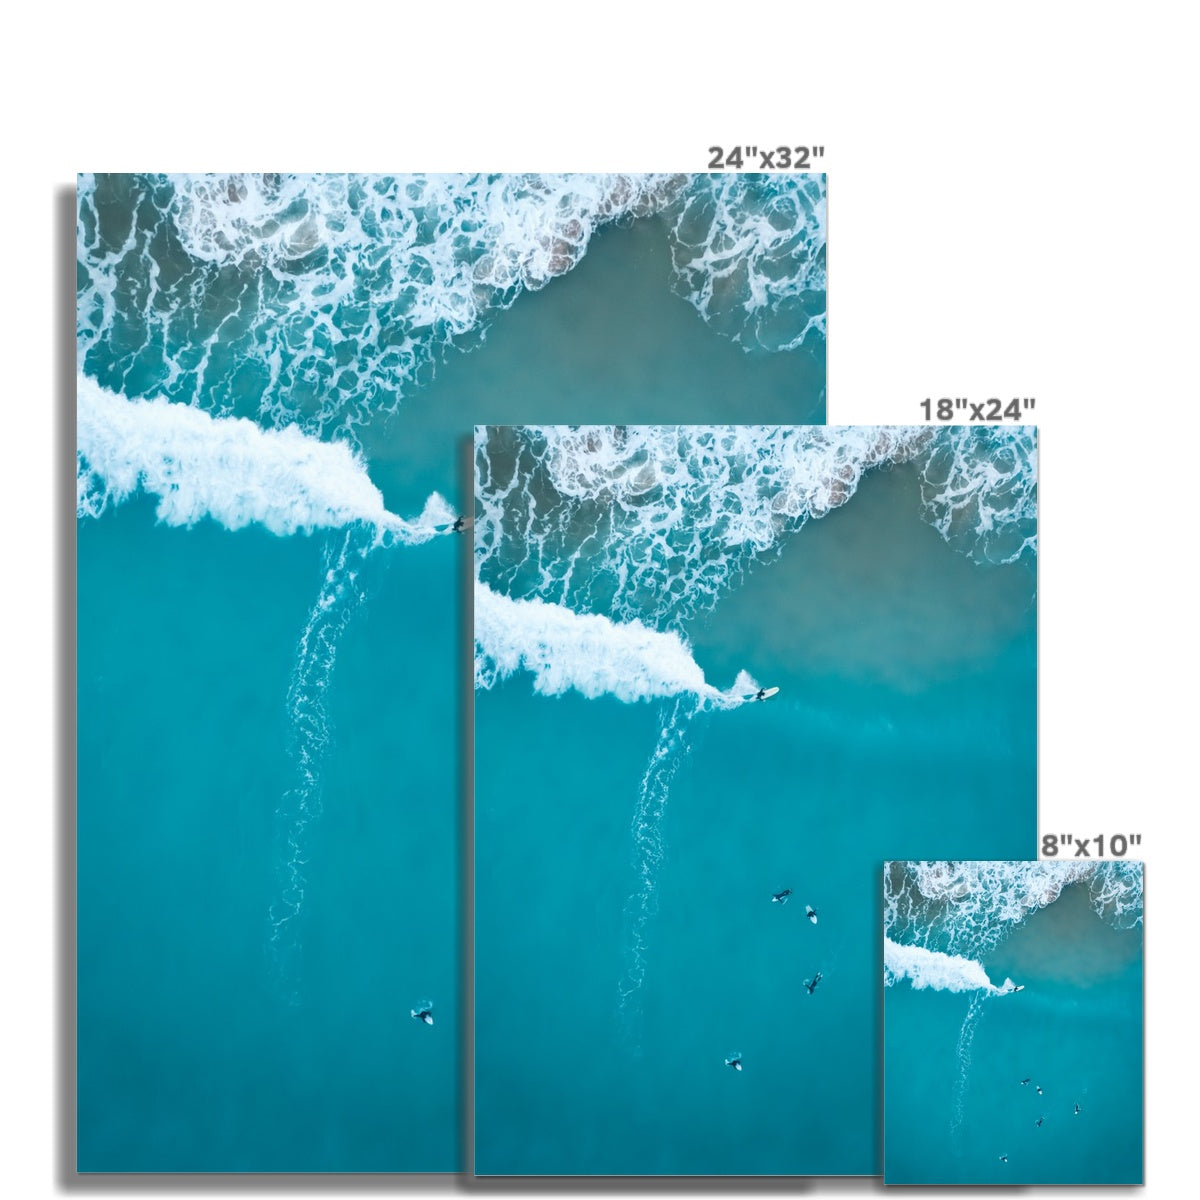 vertical surfer picture sizes